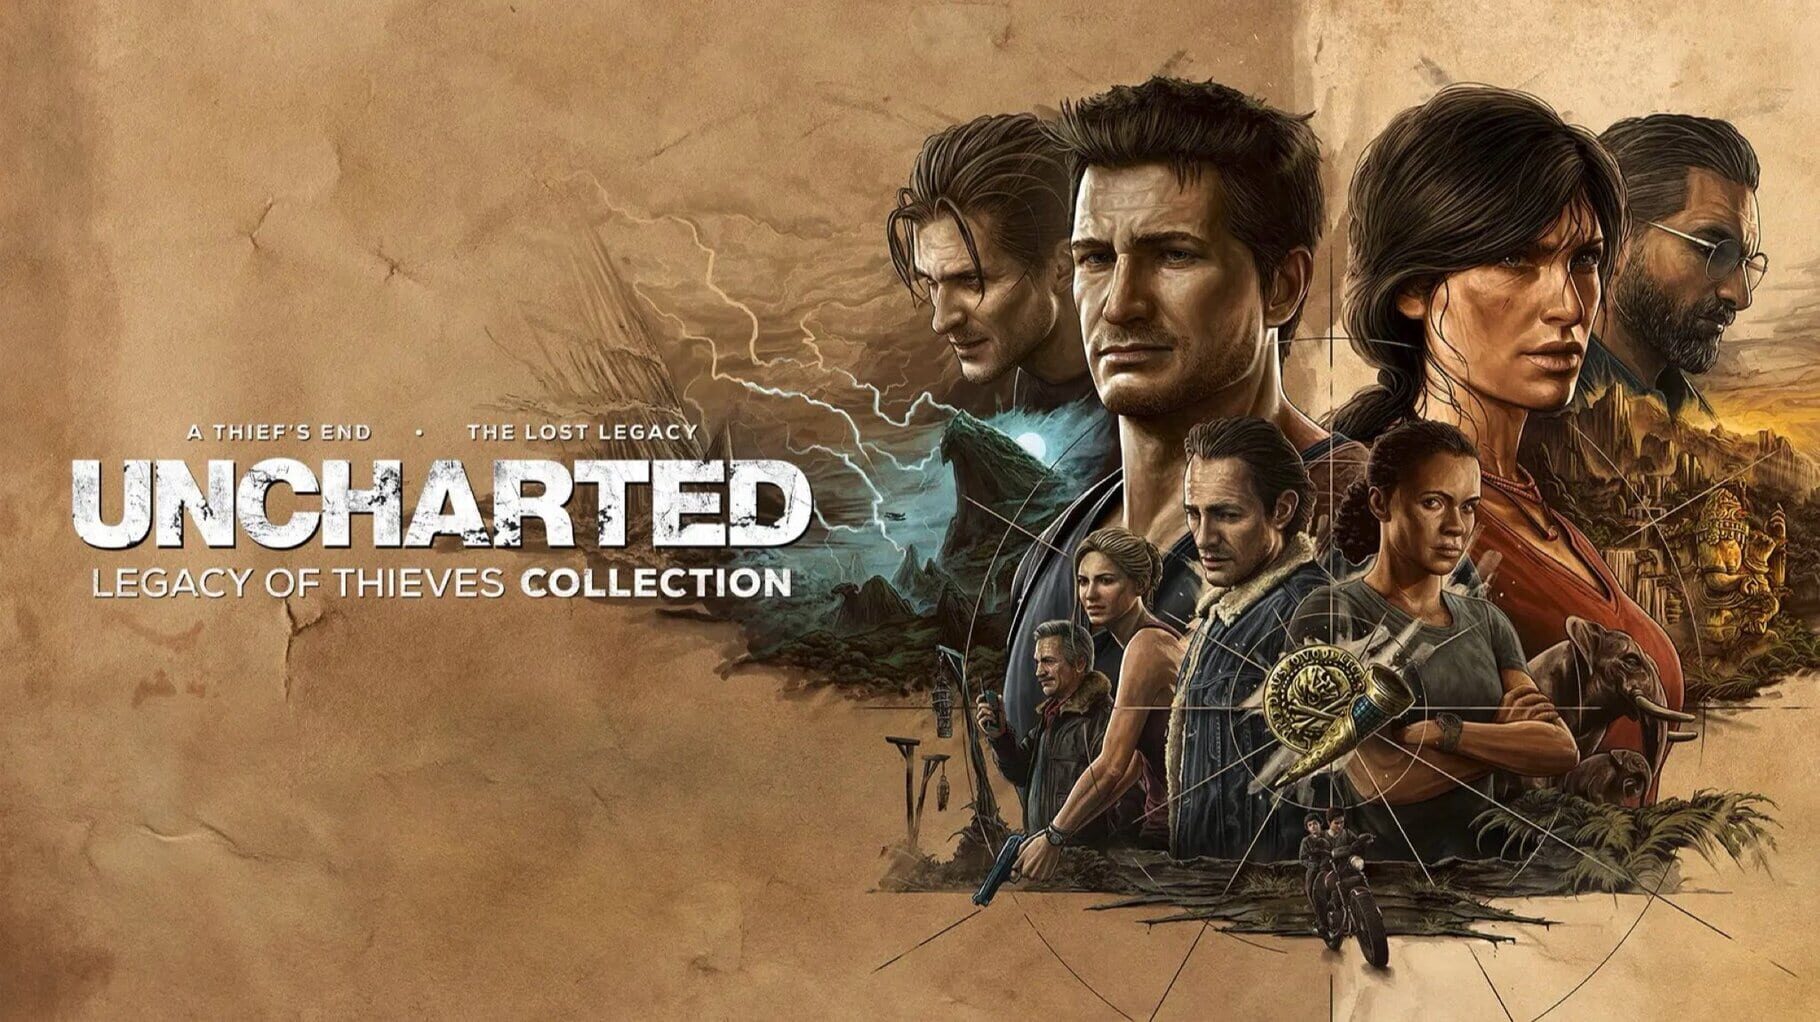 Artwork for Uncharted: Legacy of Thieves Collection